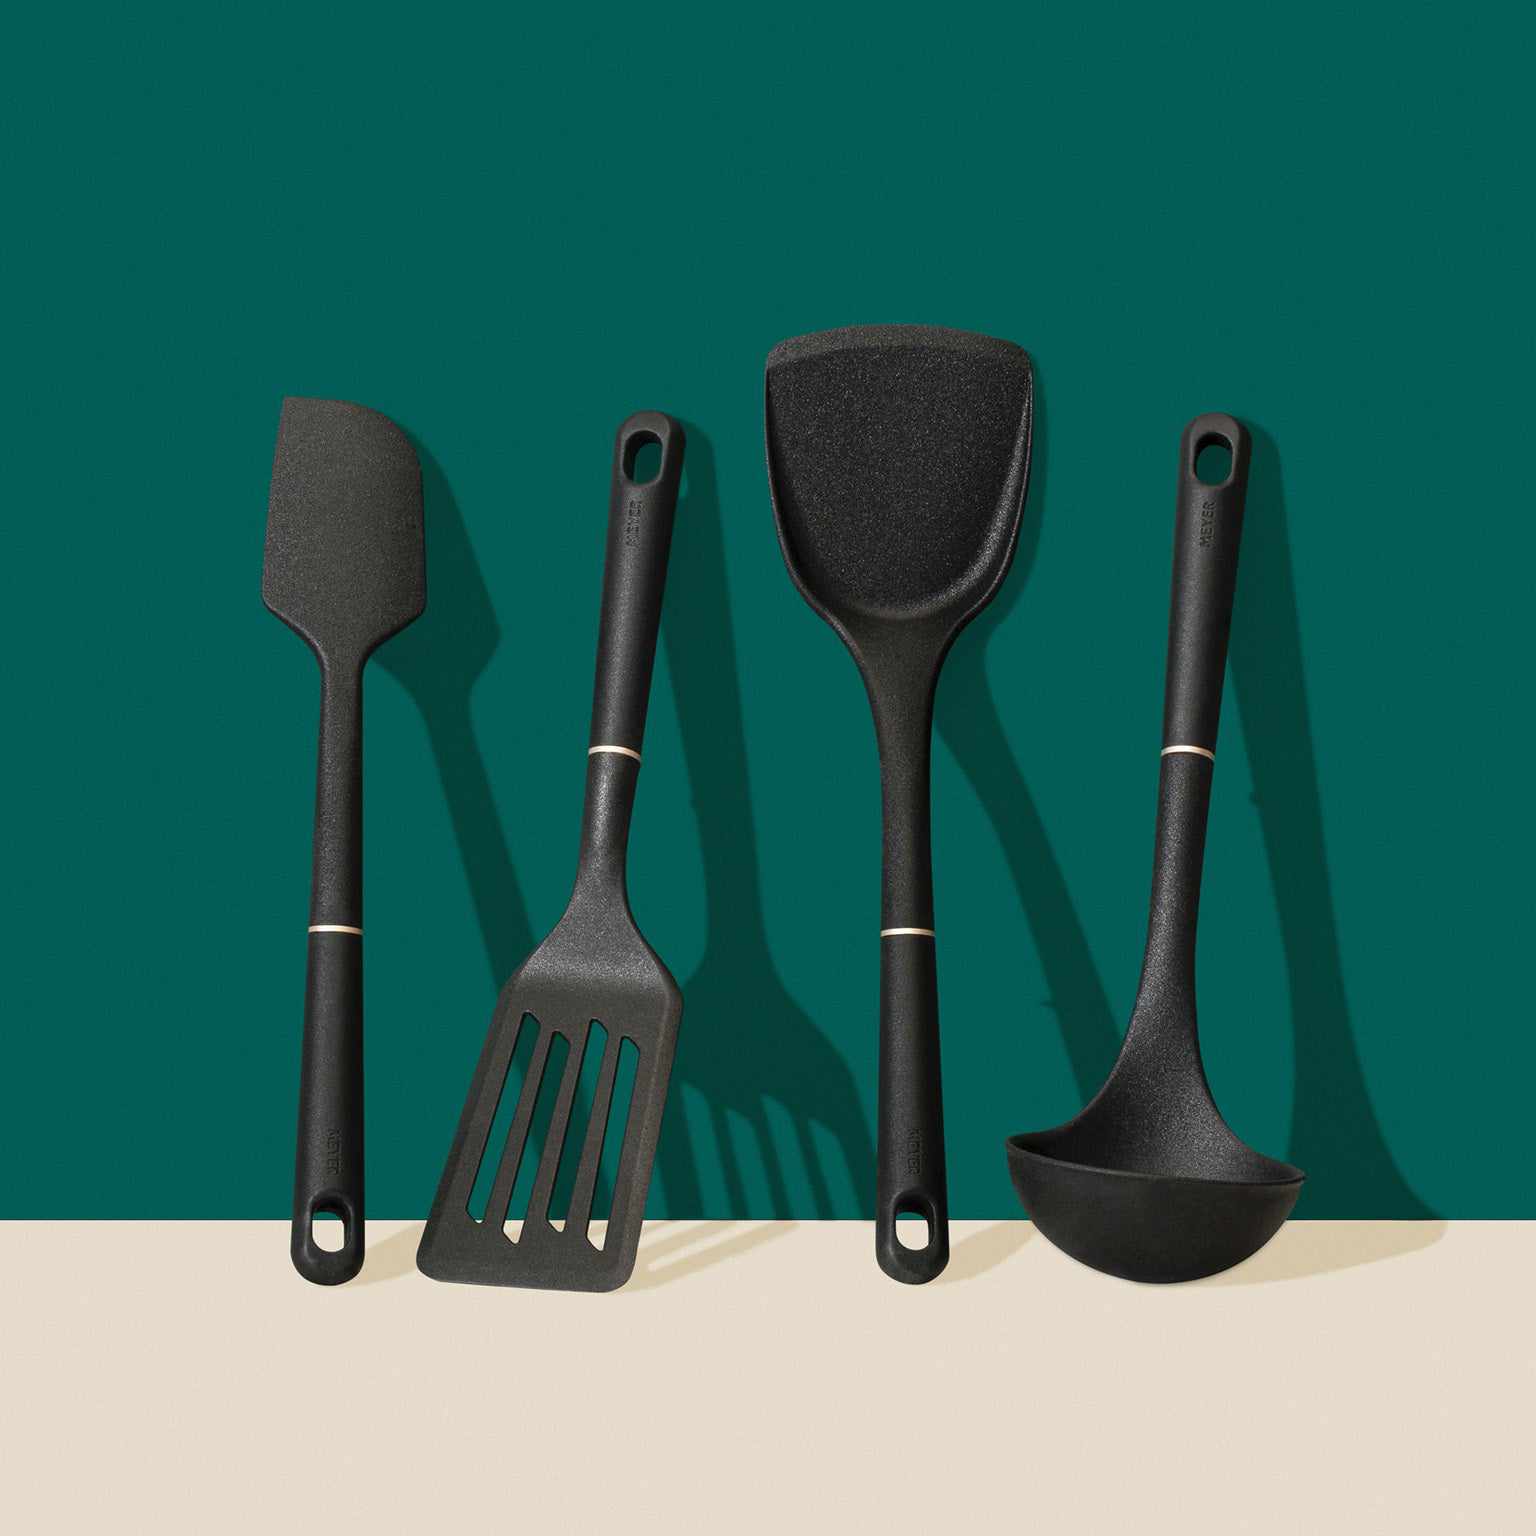 The Silicone Starter Tools Set